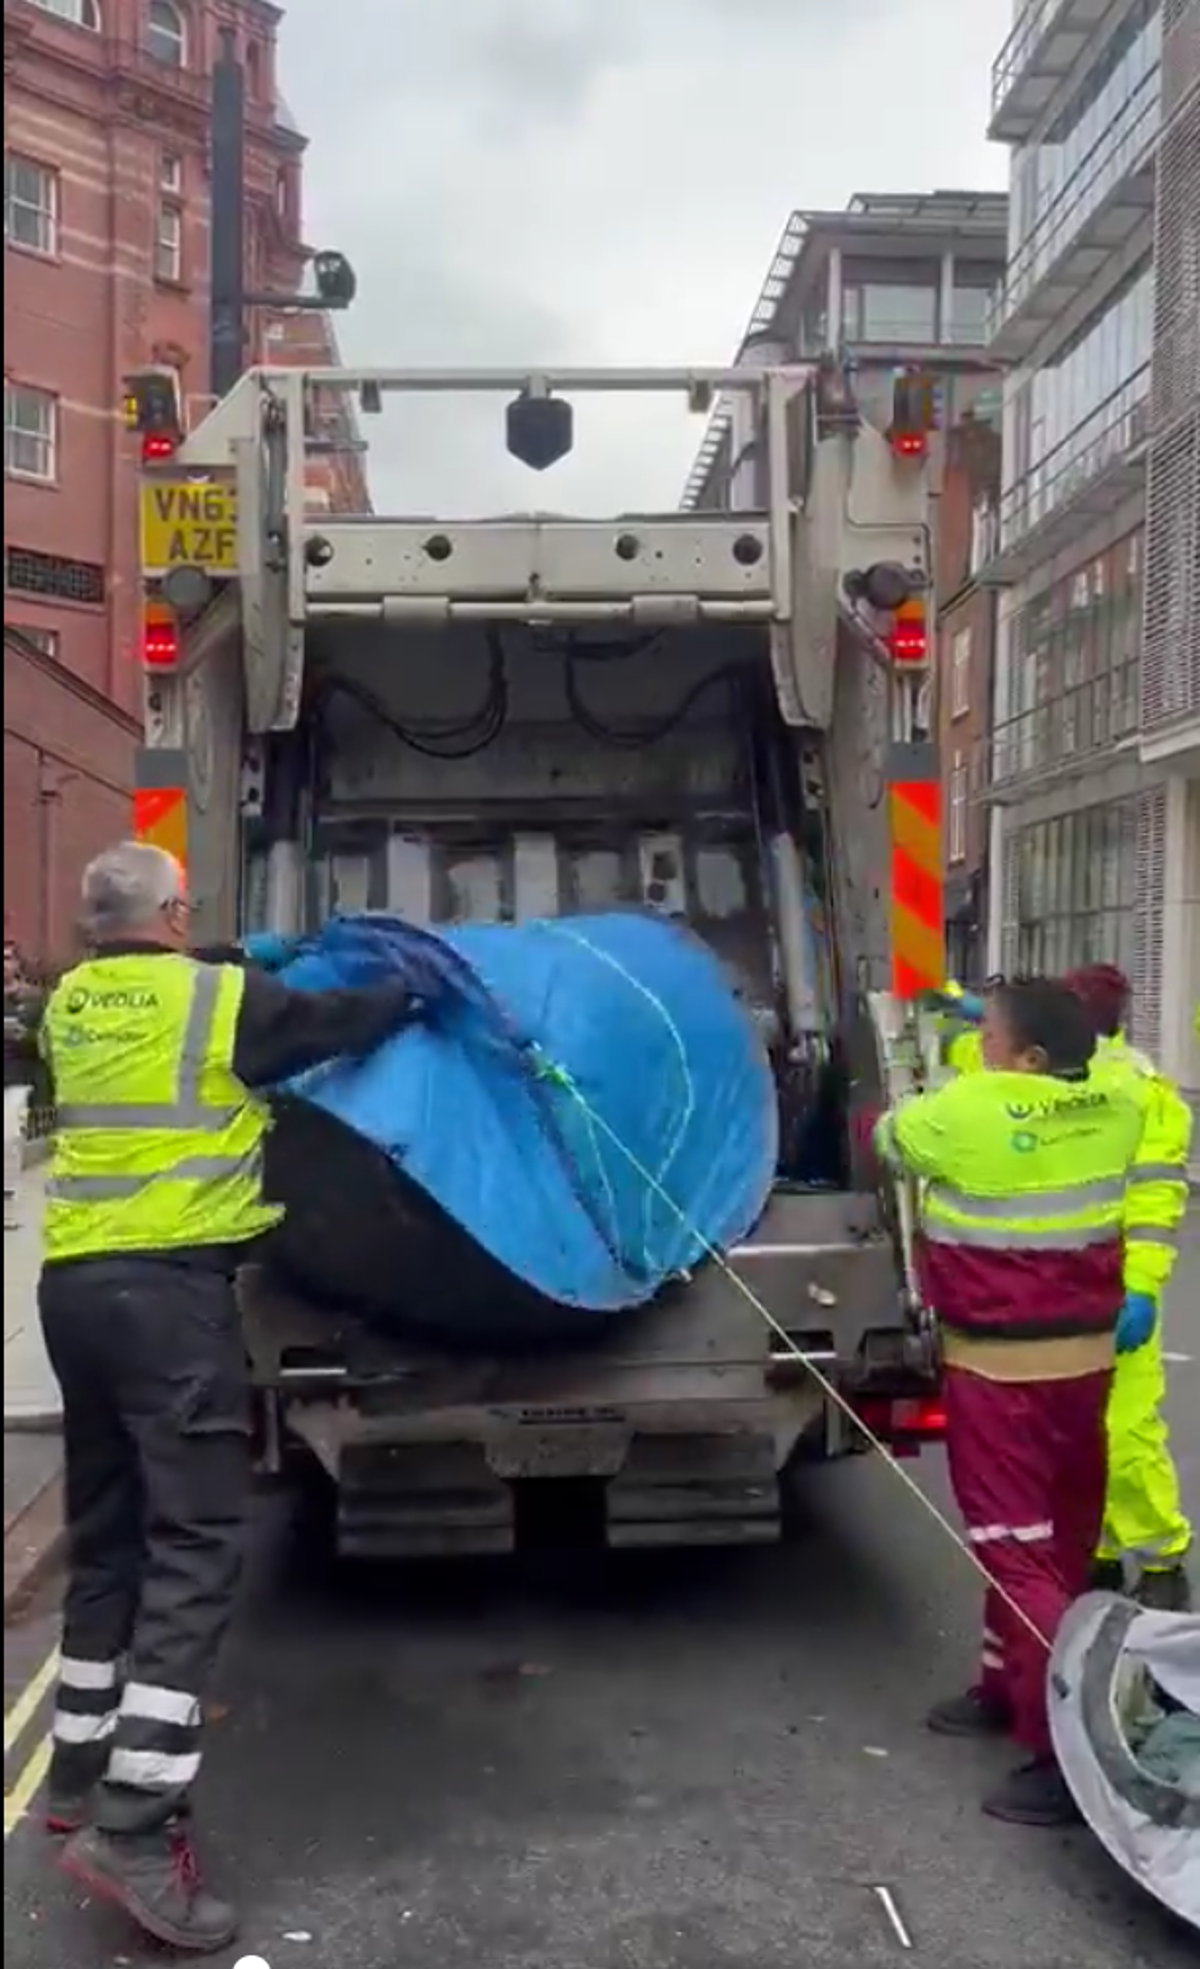 Footage appeared to show the tents being put into a waste disposal truck (Streets Kitchen / Twitter)